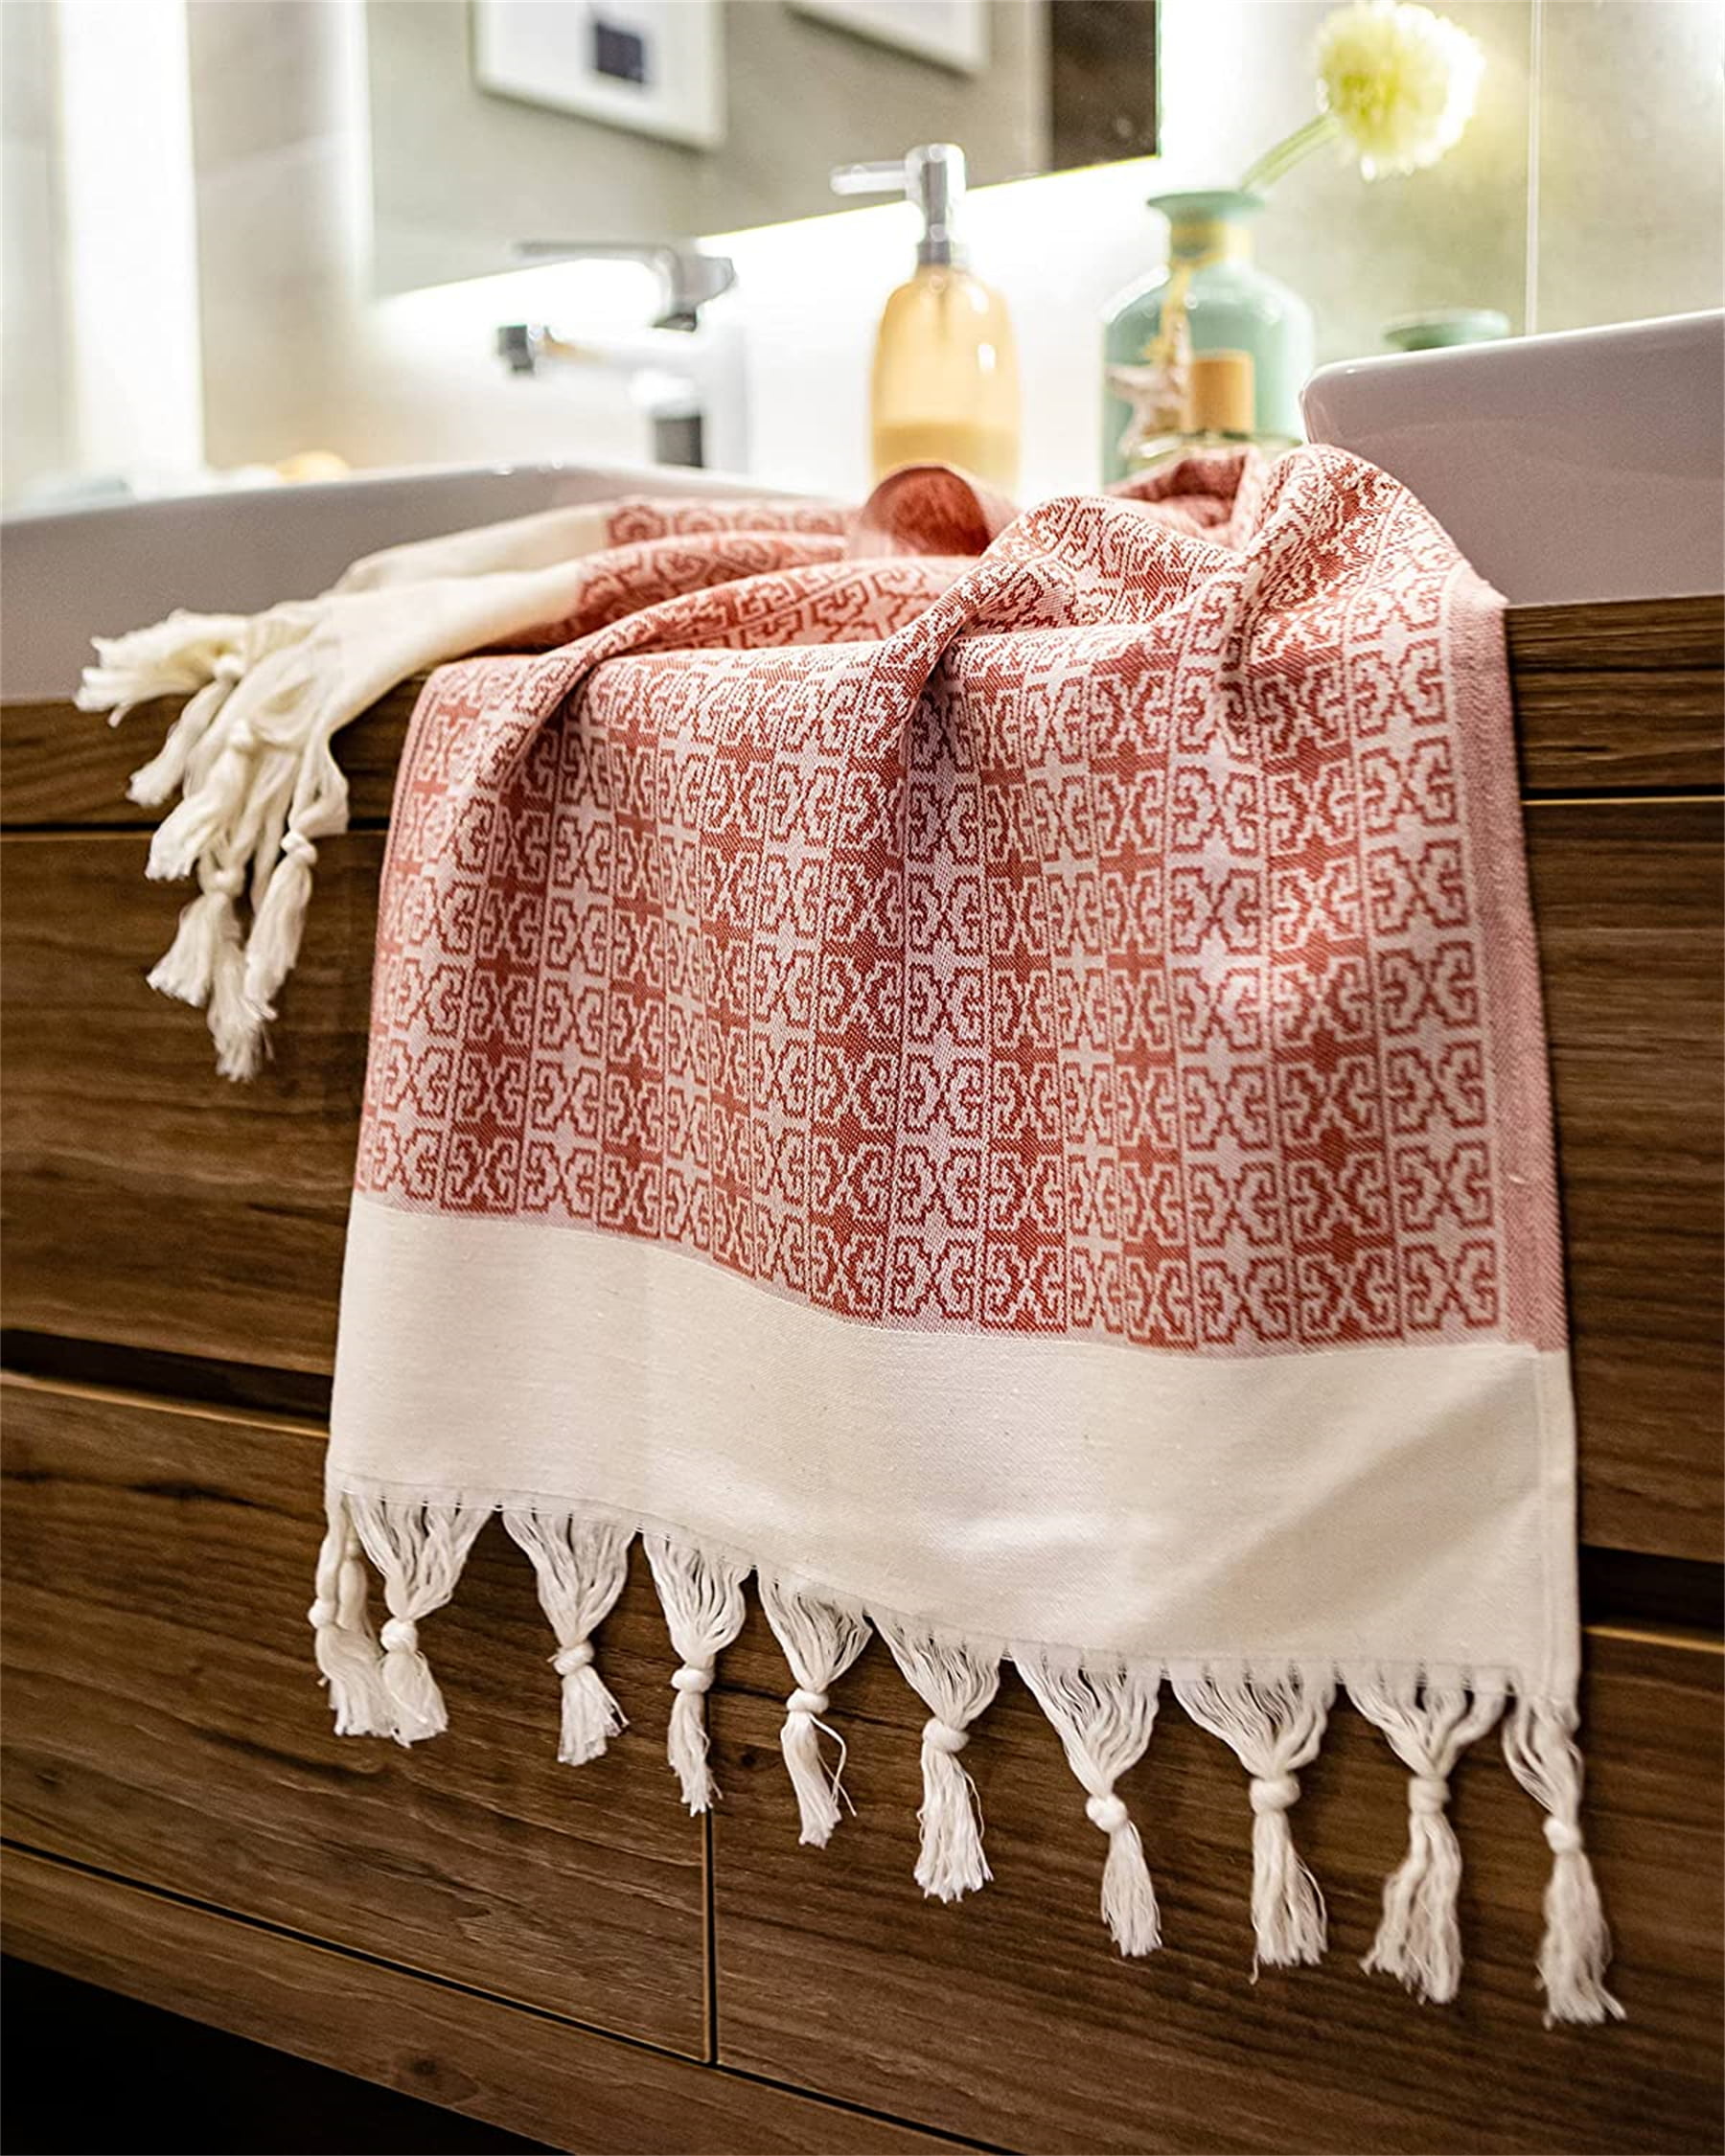 Evelynen Turkish Hand Towels for Bathroom & Kitchen Towels Decorative Set of 2 | Boho Farmhouse Hand Towels with Hanging Loops for Face, Tea, Dish